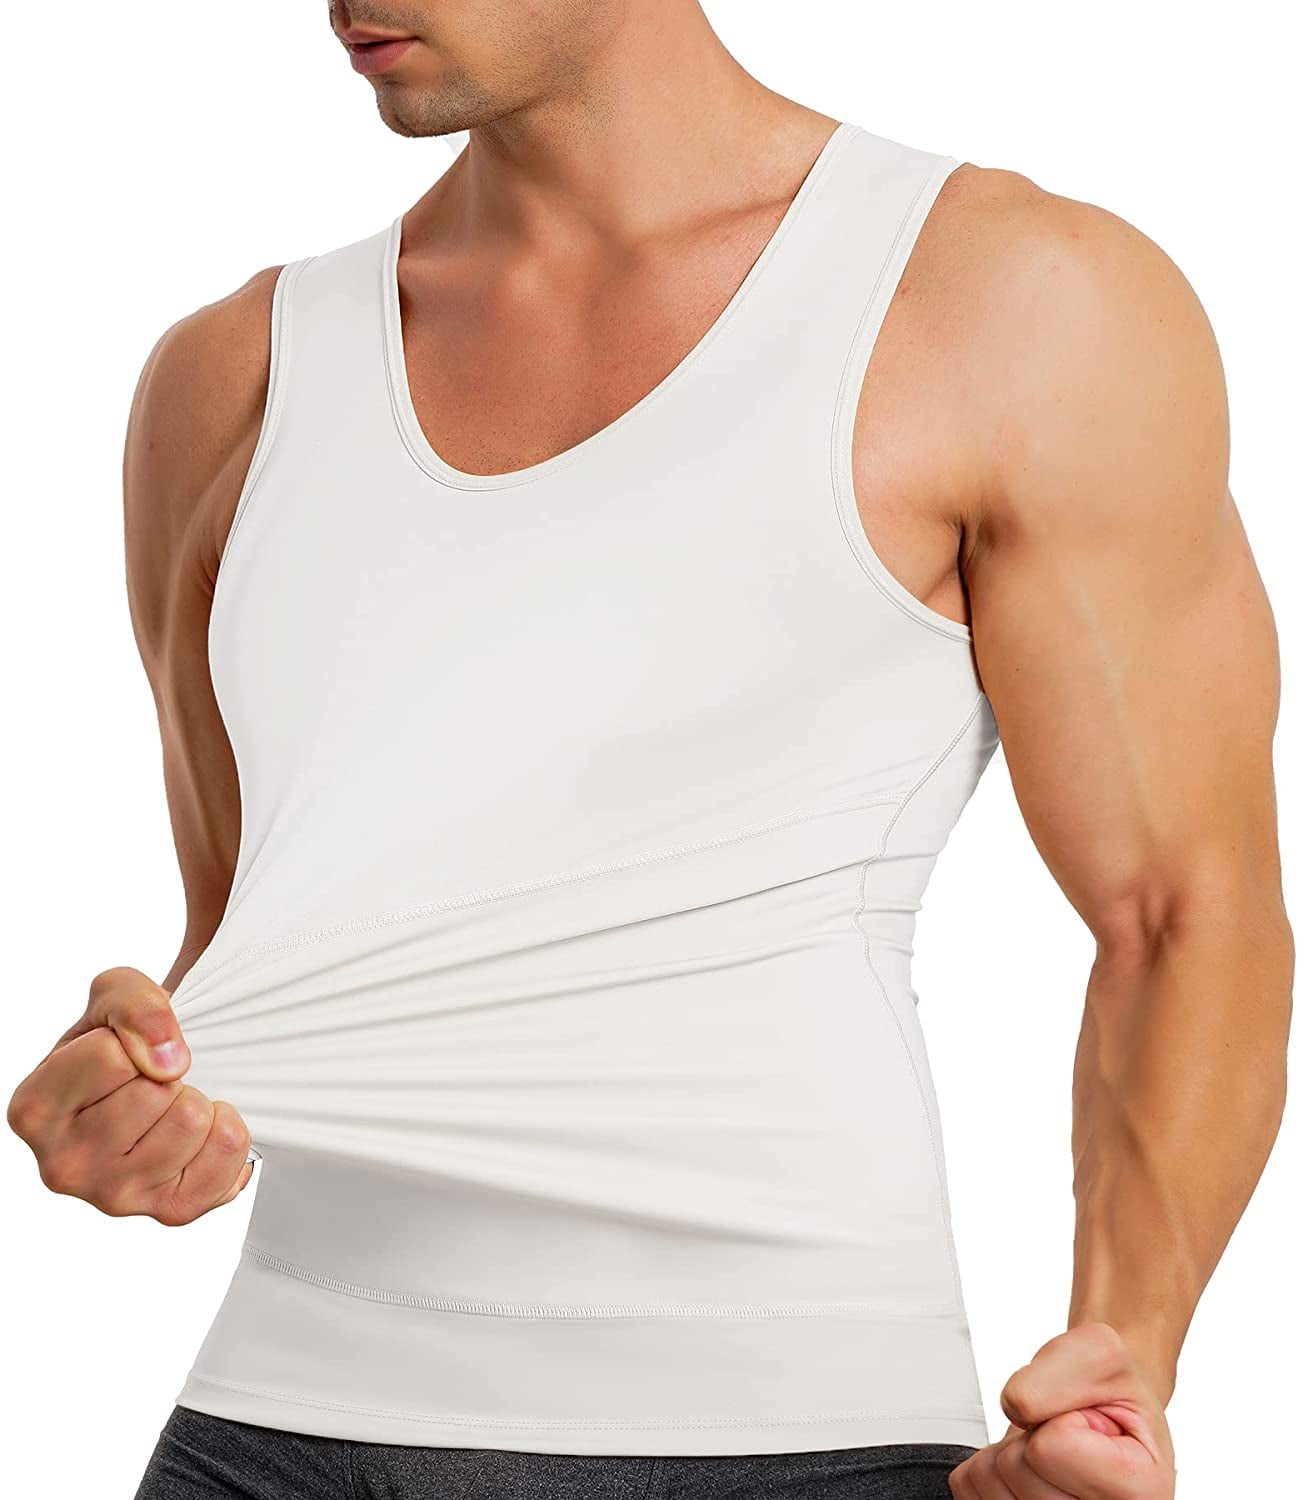 Mens Compression and Body Support Undershirt Size Medium White 